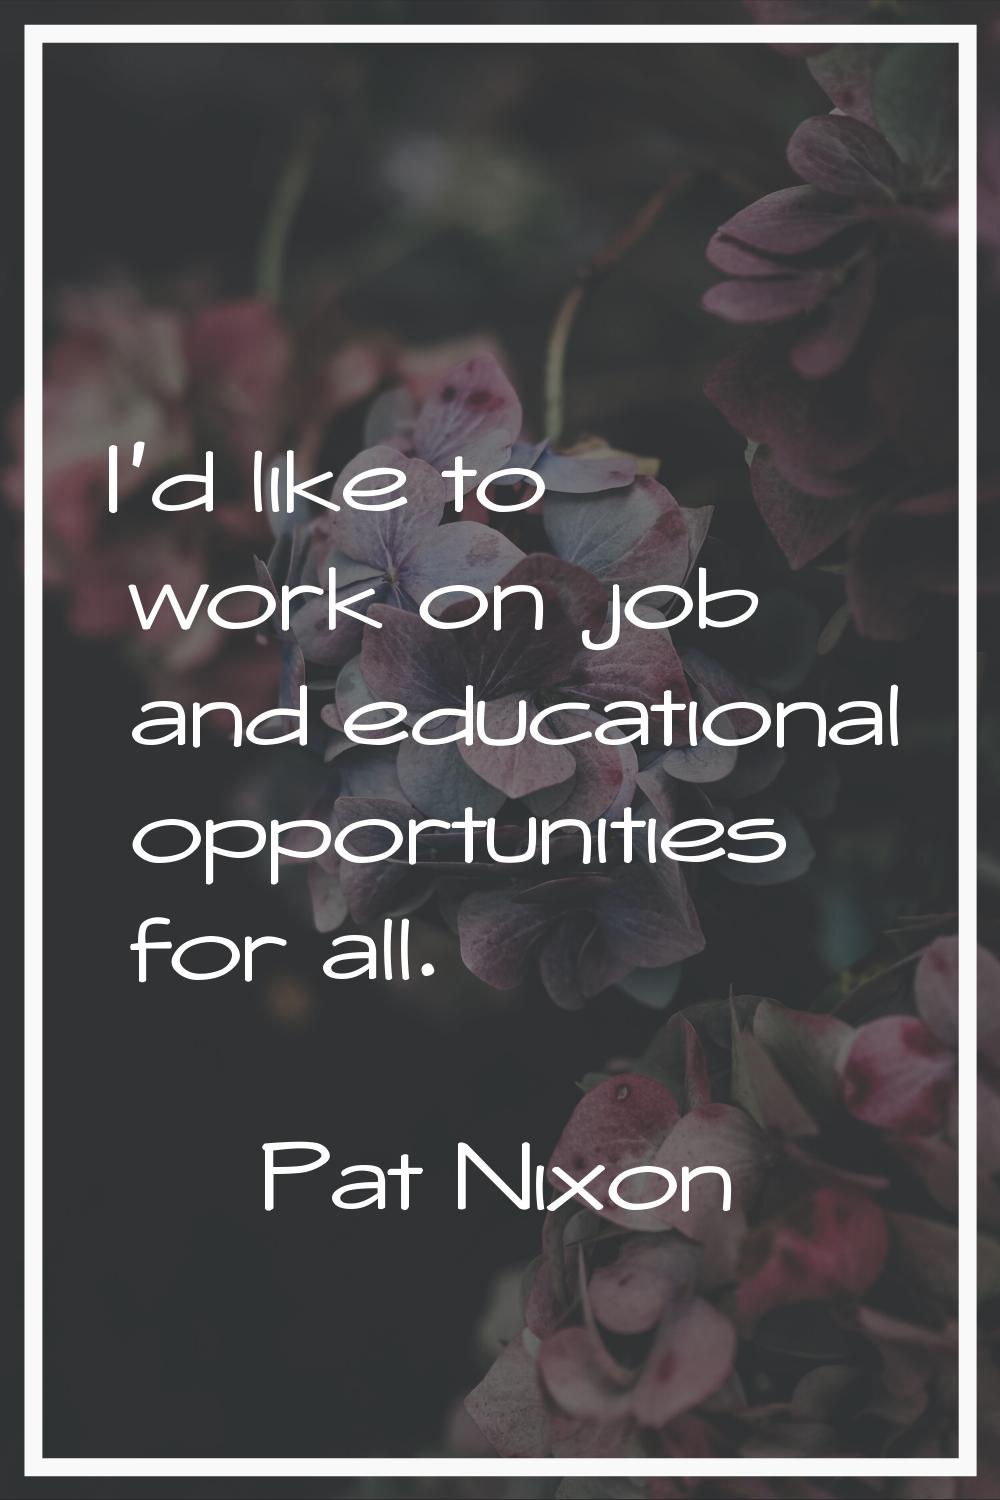 I'd like to work on job and educational opportunities for all.